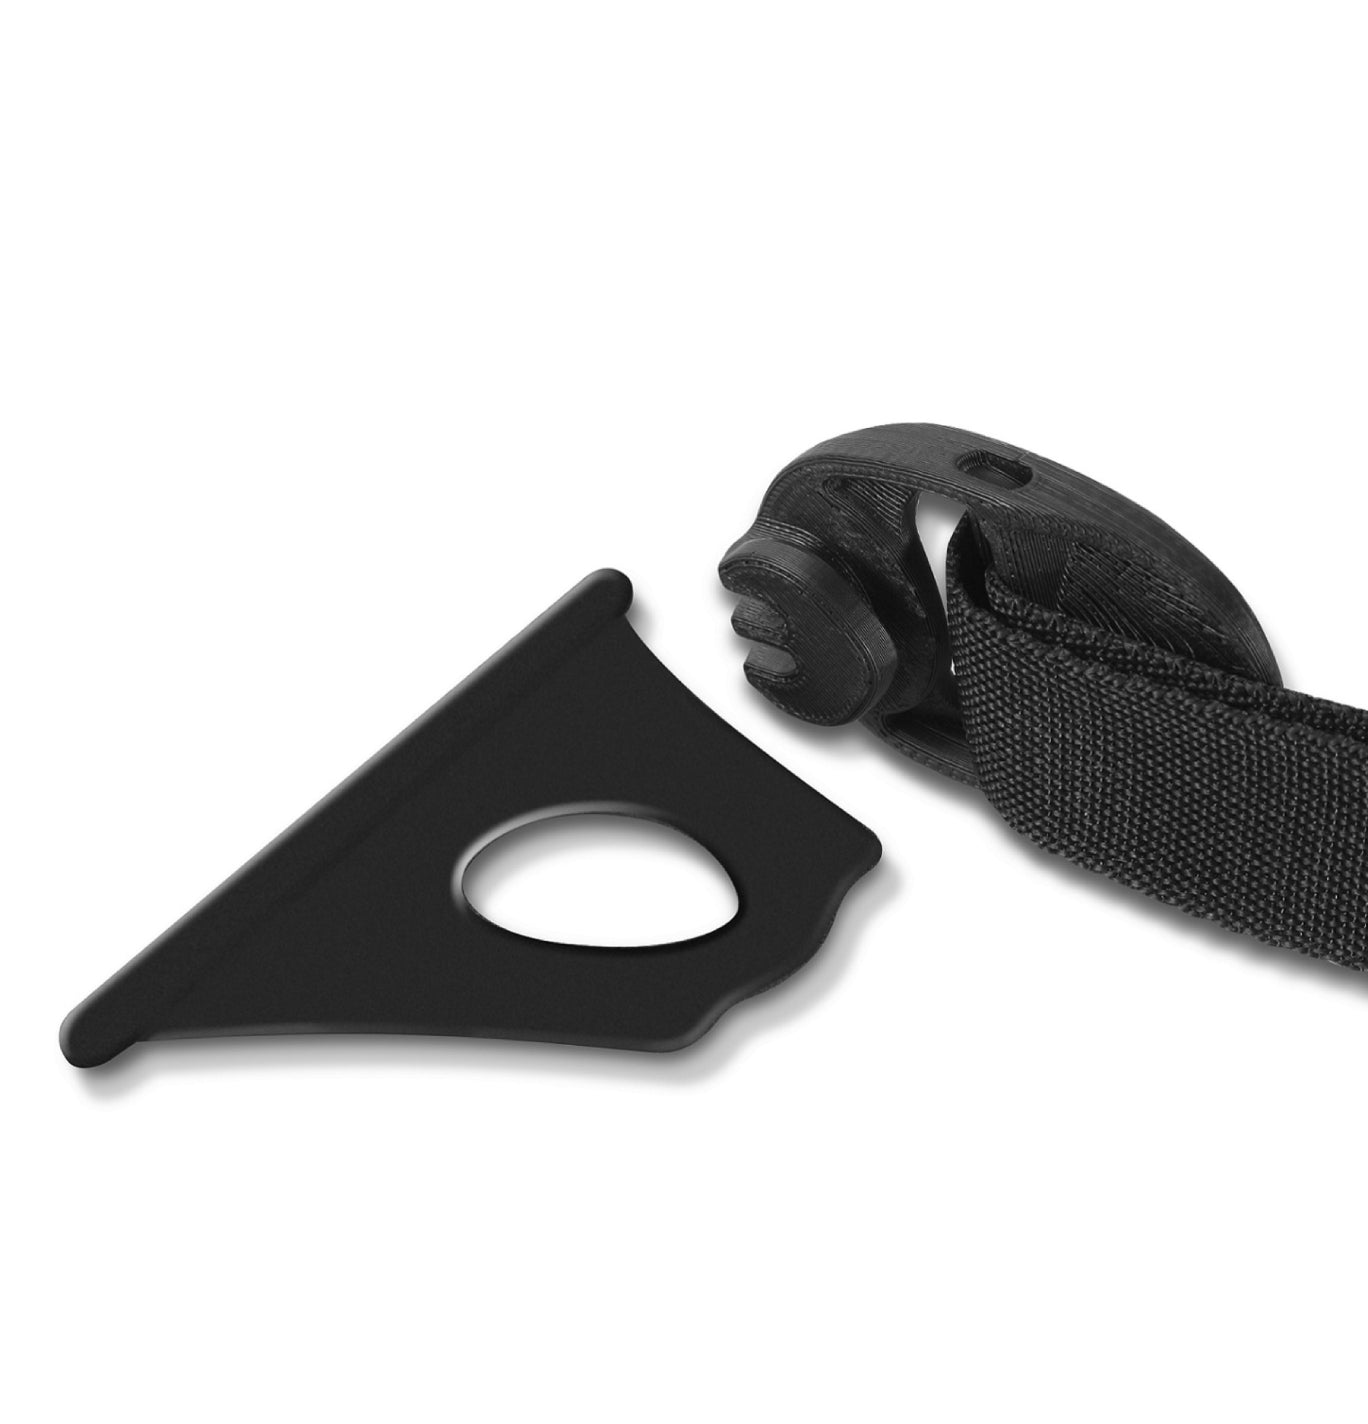 Thule Strap Kit for Storage Organisers Image